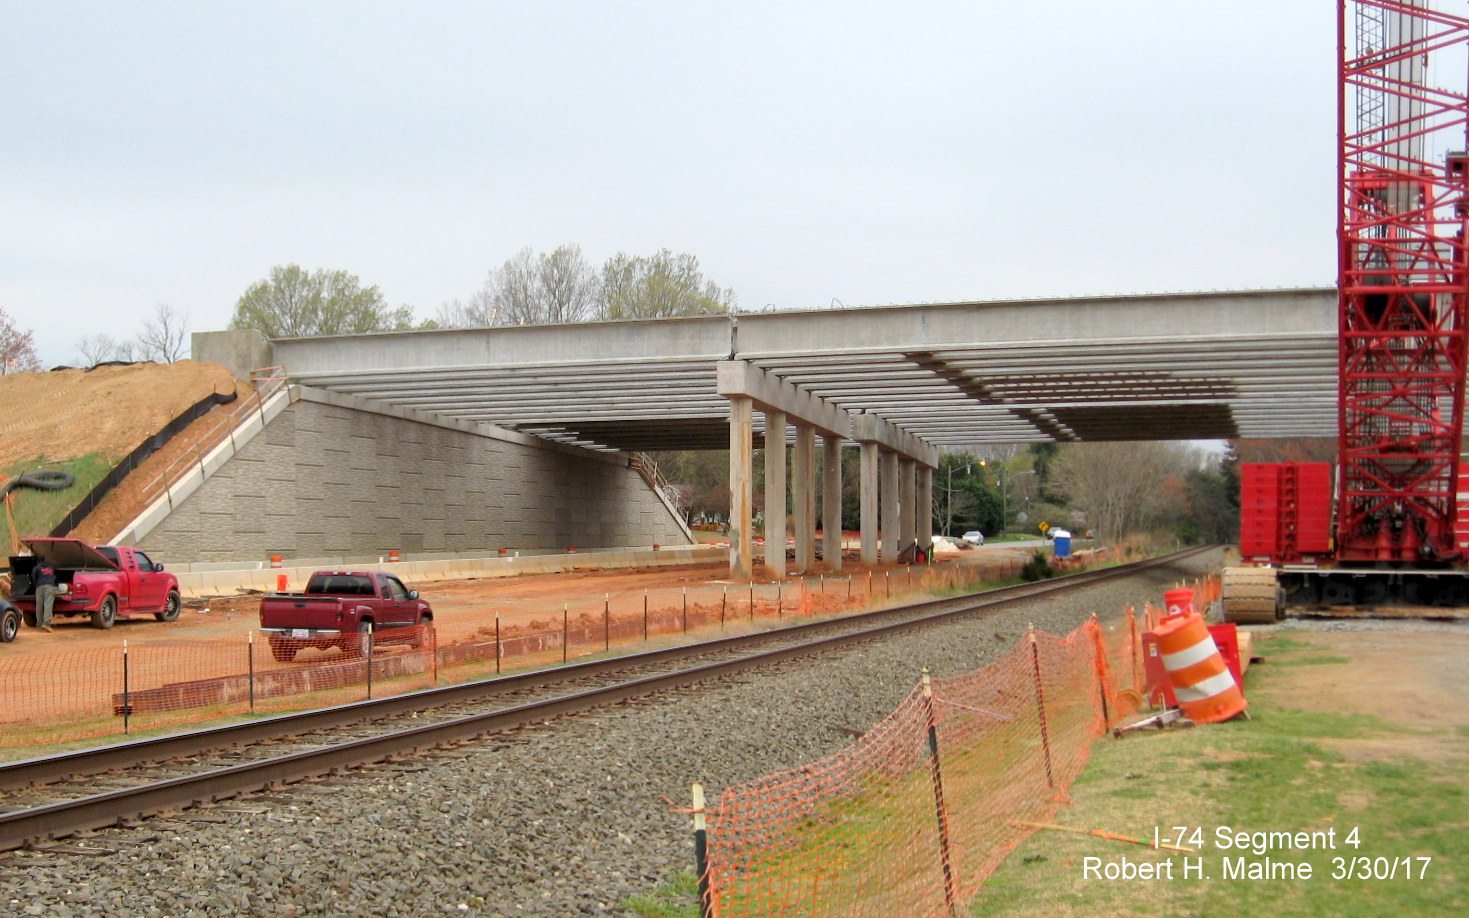 Image of view along railroad tracks of new bridge being constructed for I-74/Beltway over W. Mountain St. in Winston-Salem